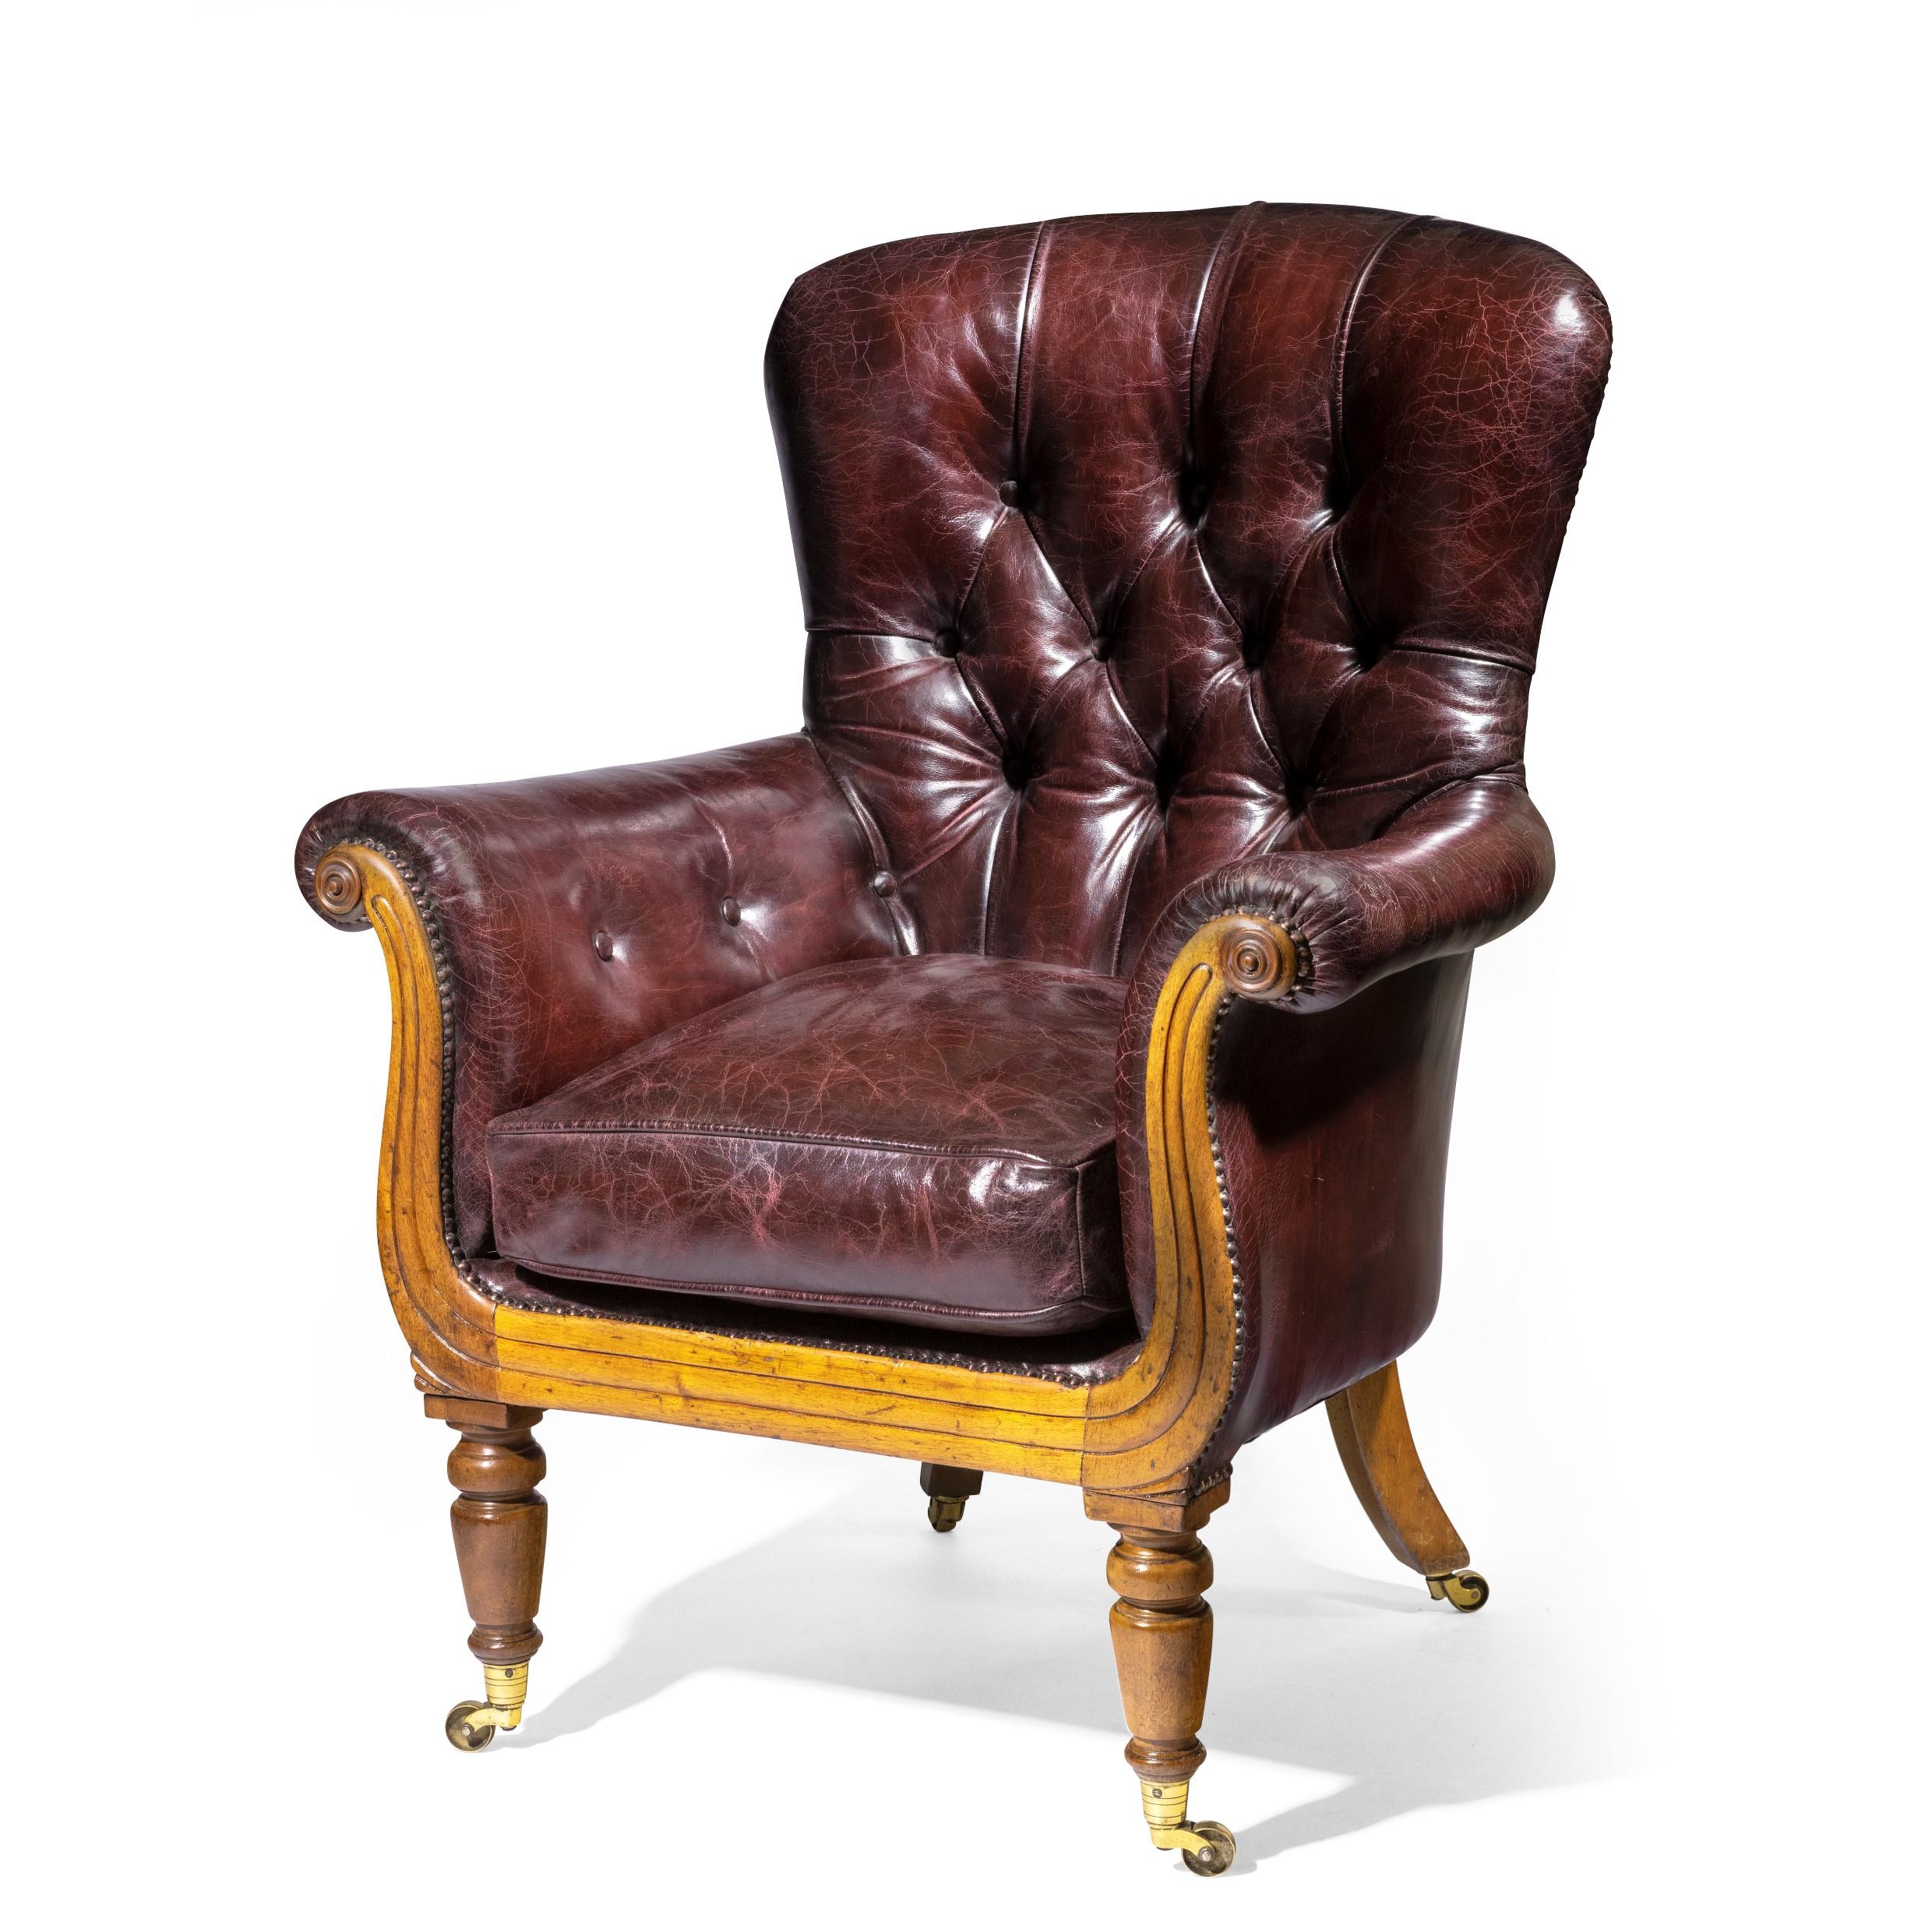 A William IV shaped mahogany library chair of generous proportions. Reupholstered in our own workshops in distressed burgundy leather. Raised on turned legs and brass casters.